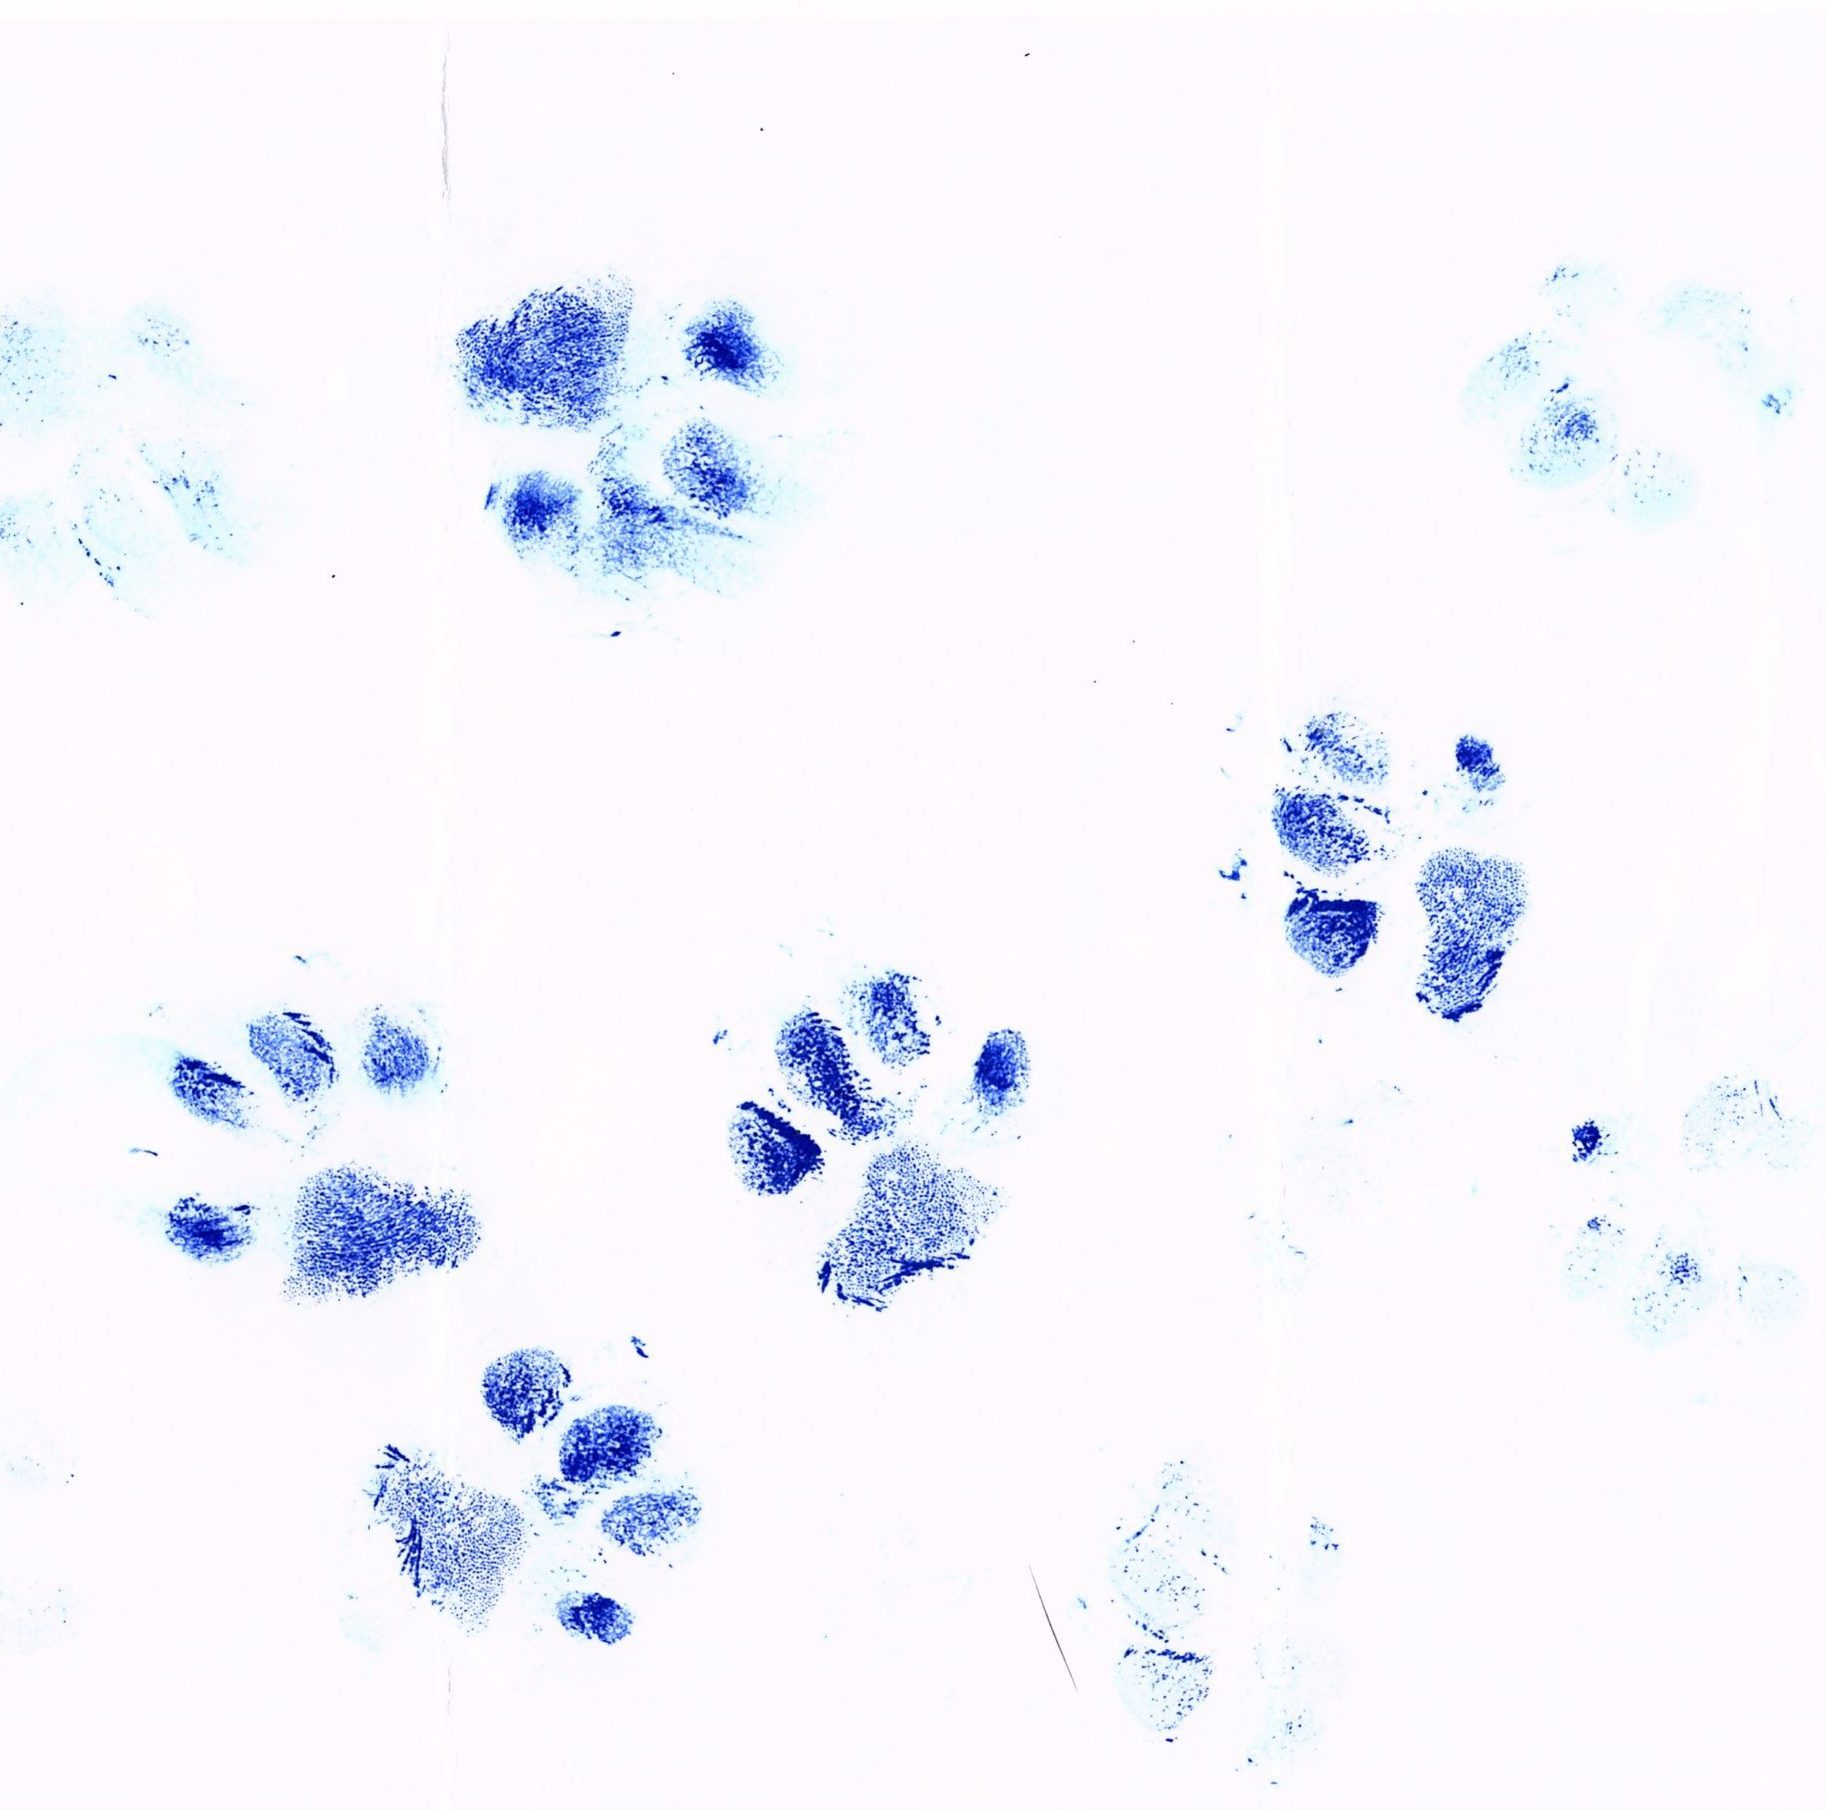 How To Get A Dog Paw Print - It's Easier Than You Think Cheeky Little Prints